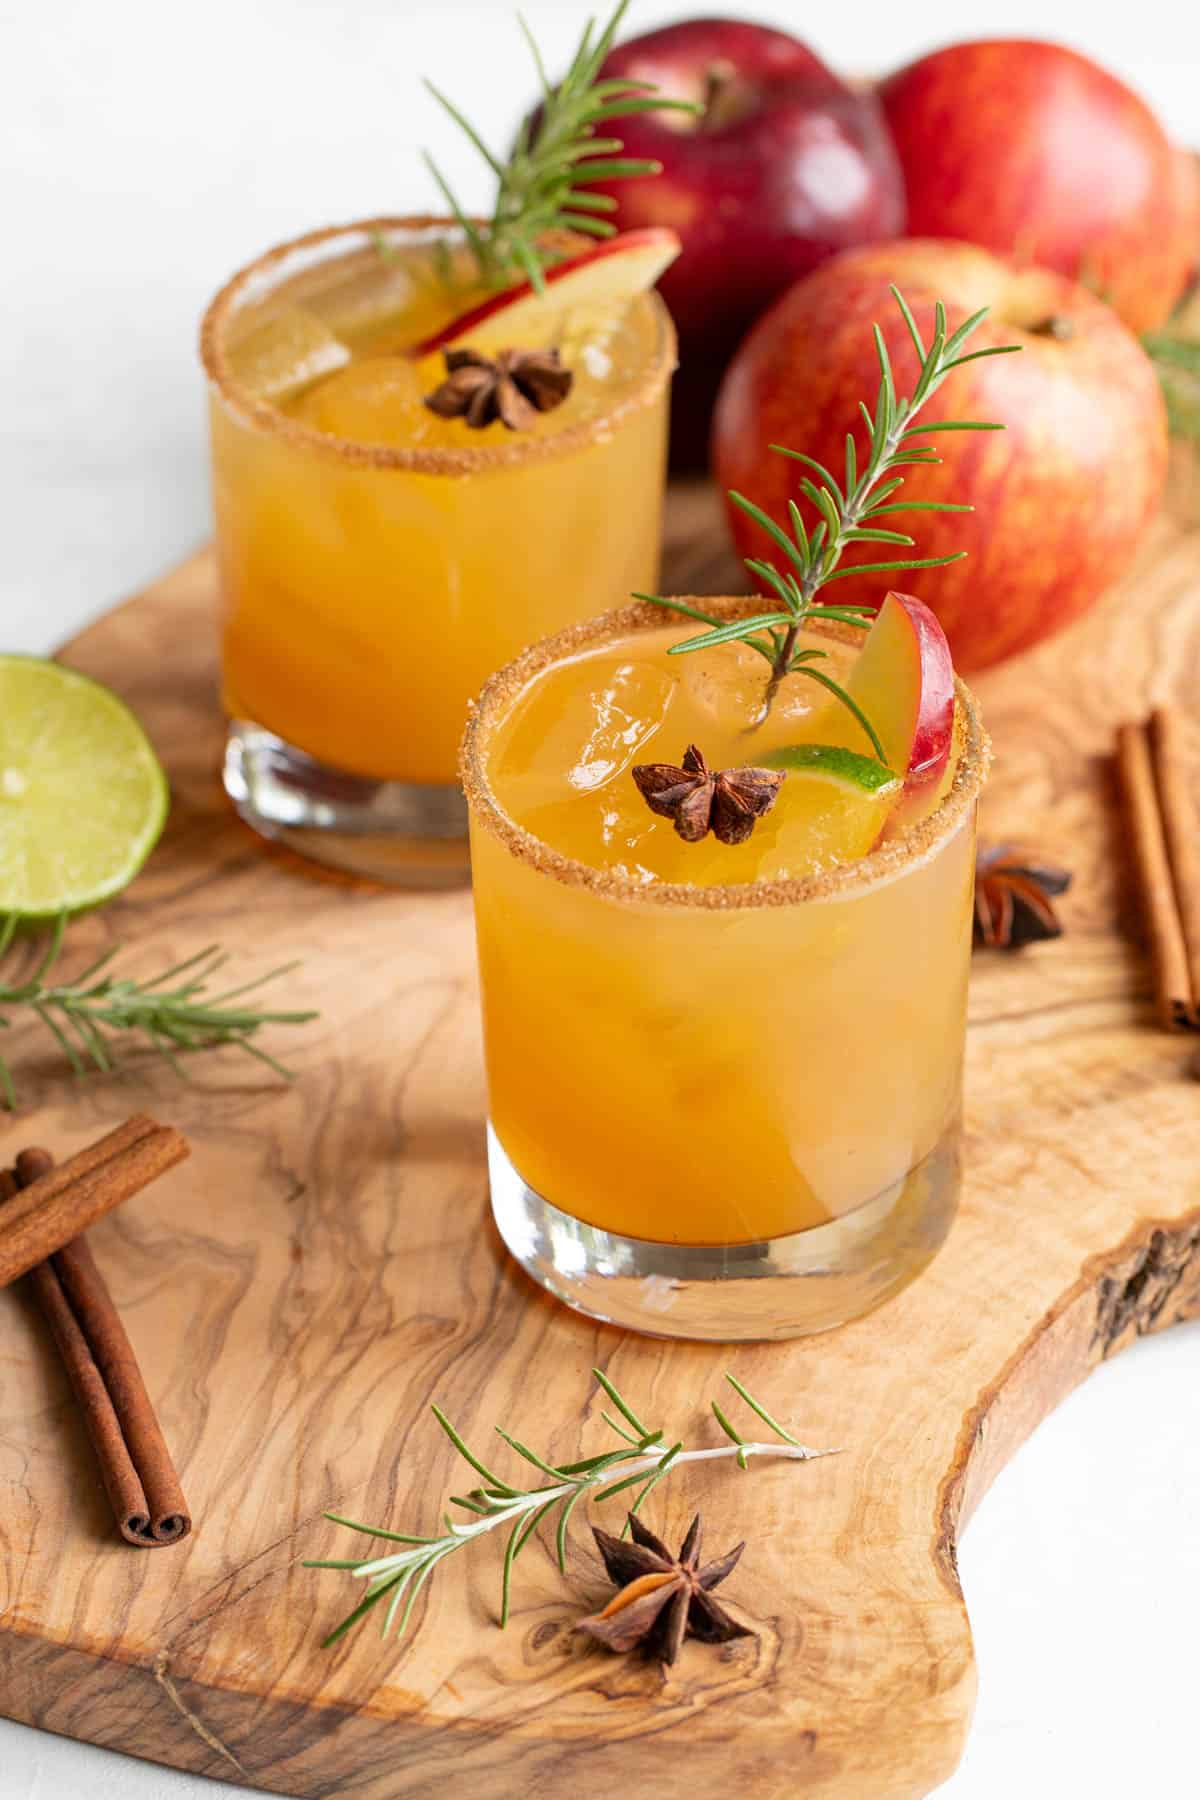 Front angled view of two garnished apple cider margaritas on a wood surface.